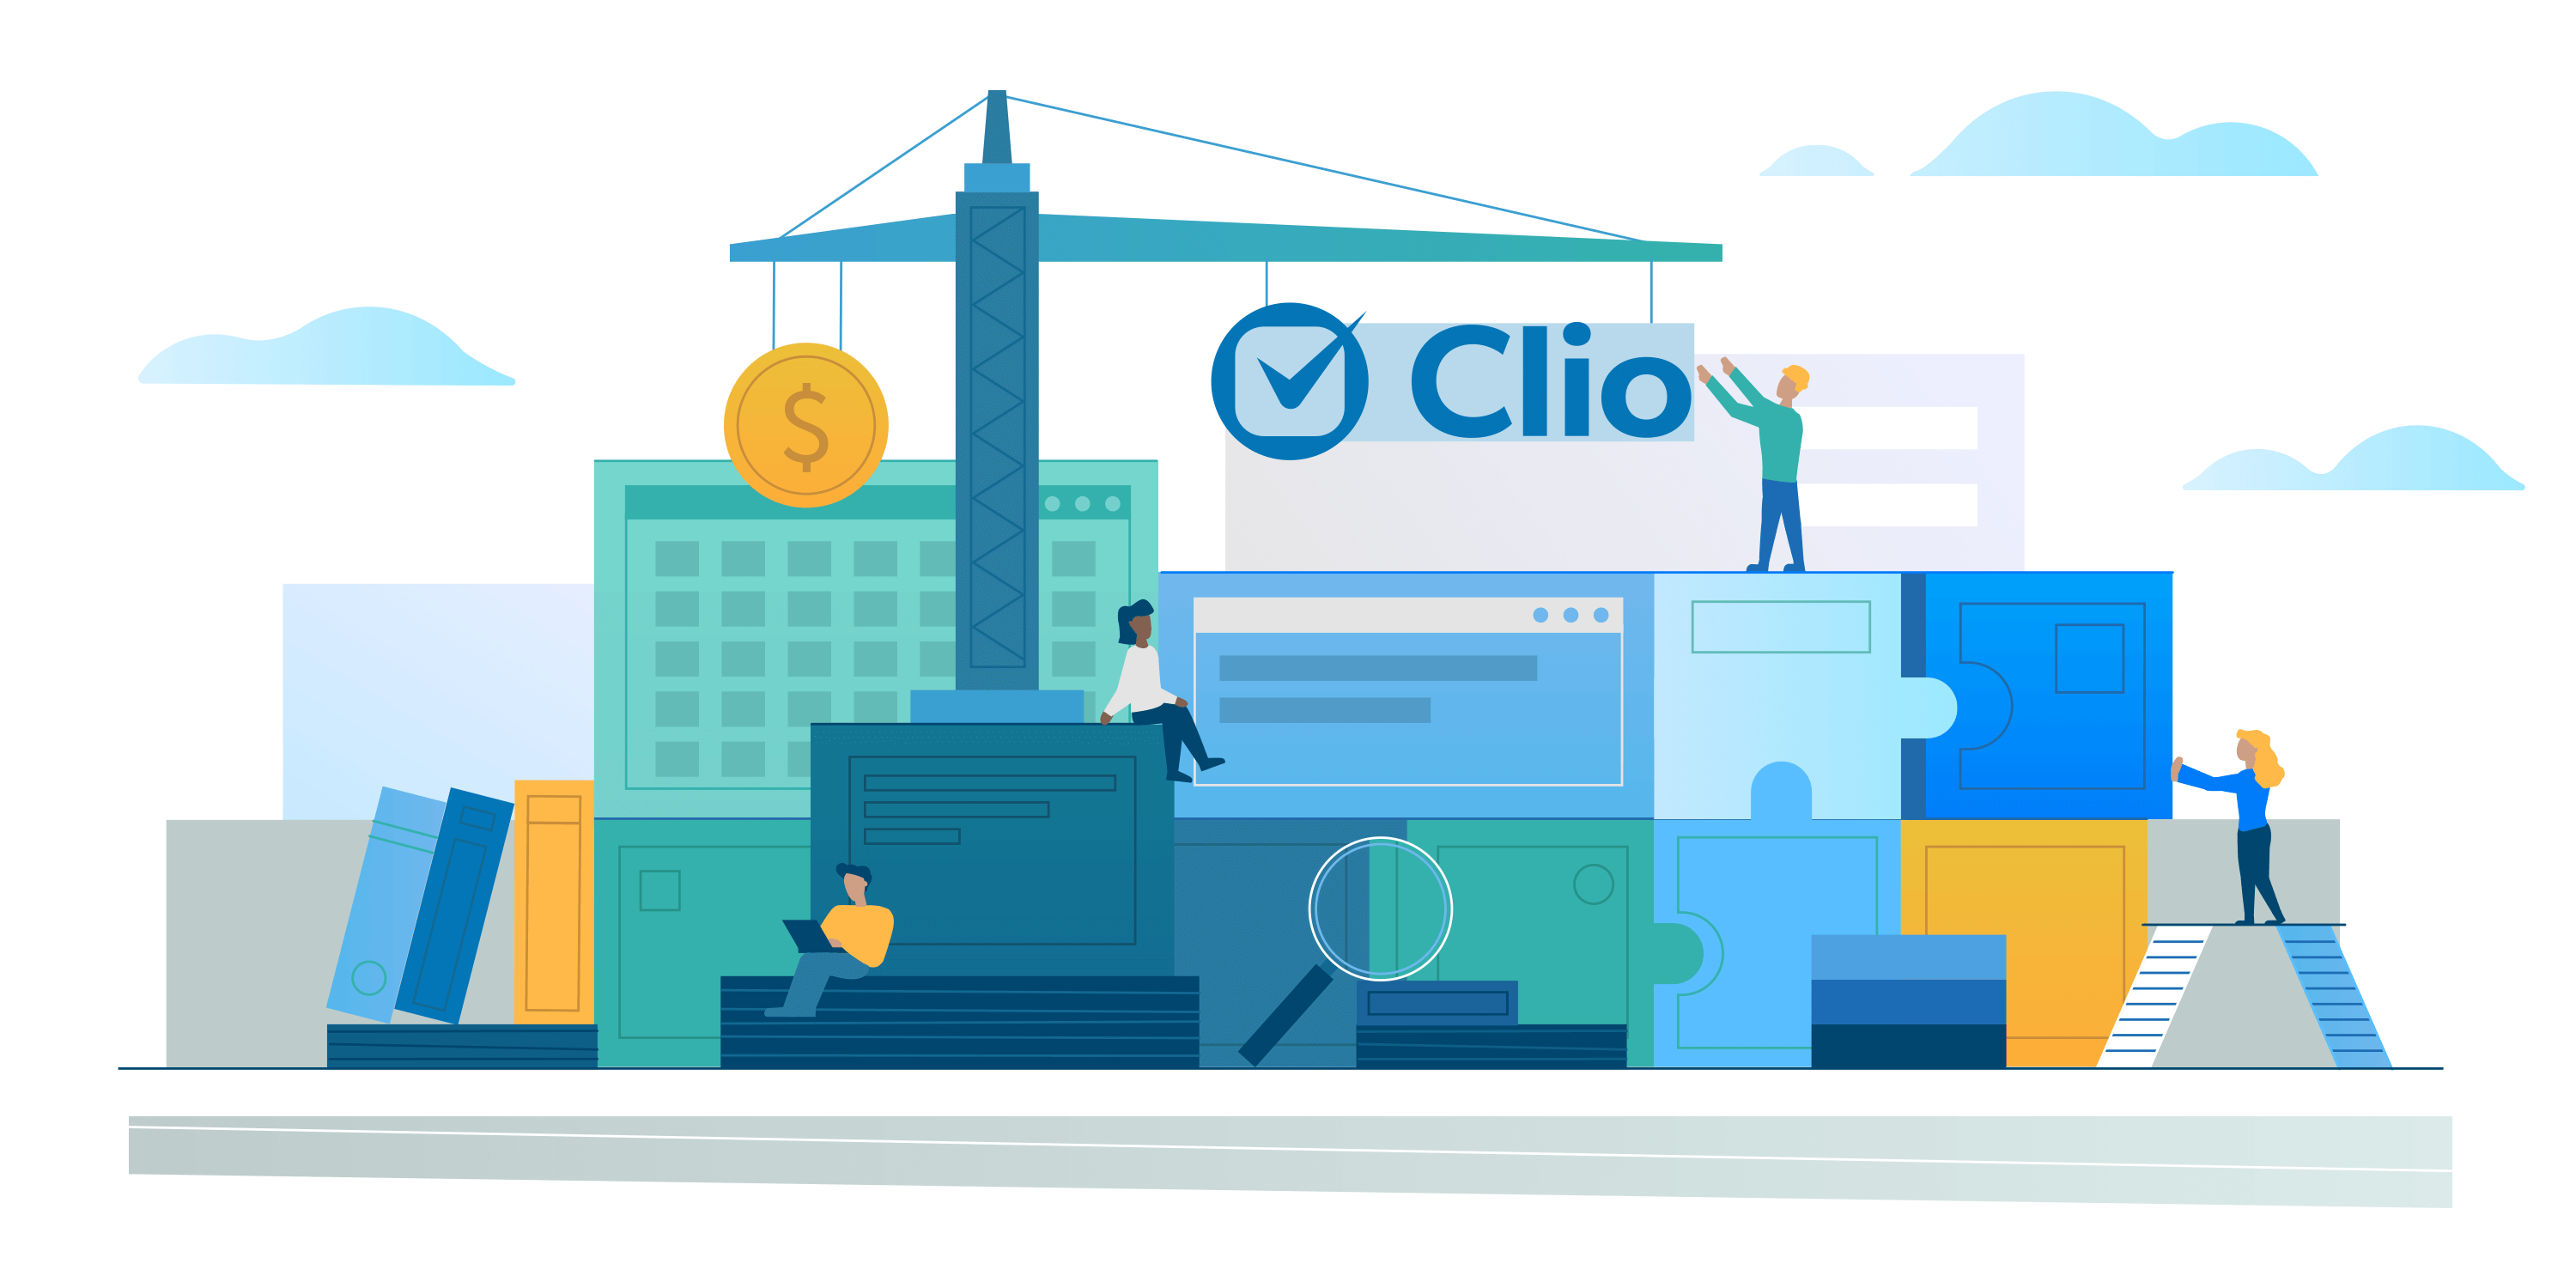 Cloud Technology Leader Clio Announces $250 Million Investment from TCV and JMI to Transform the Legal Industry